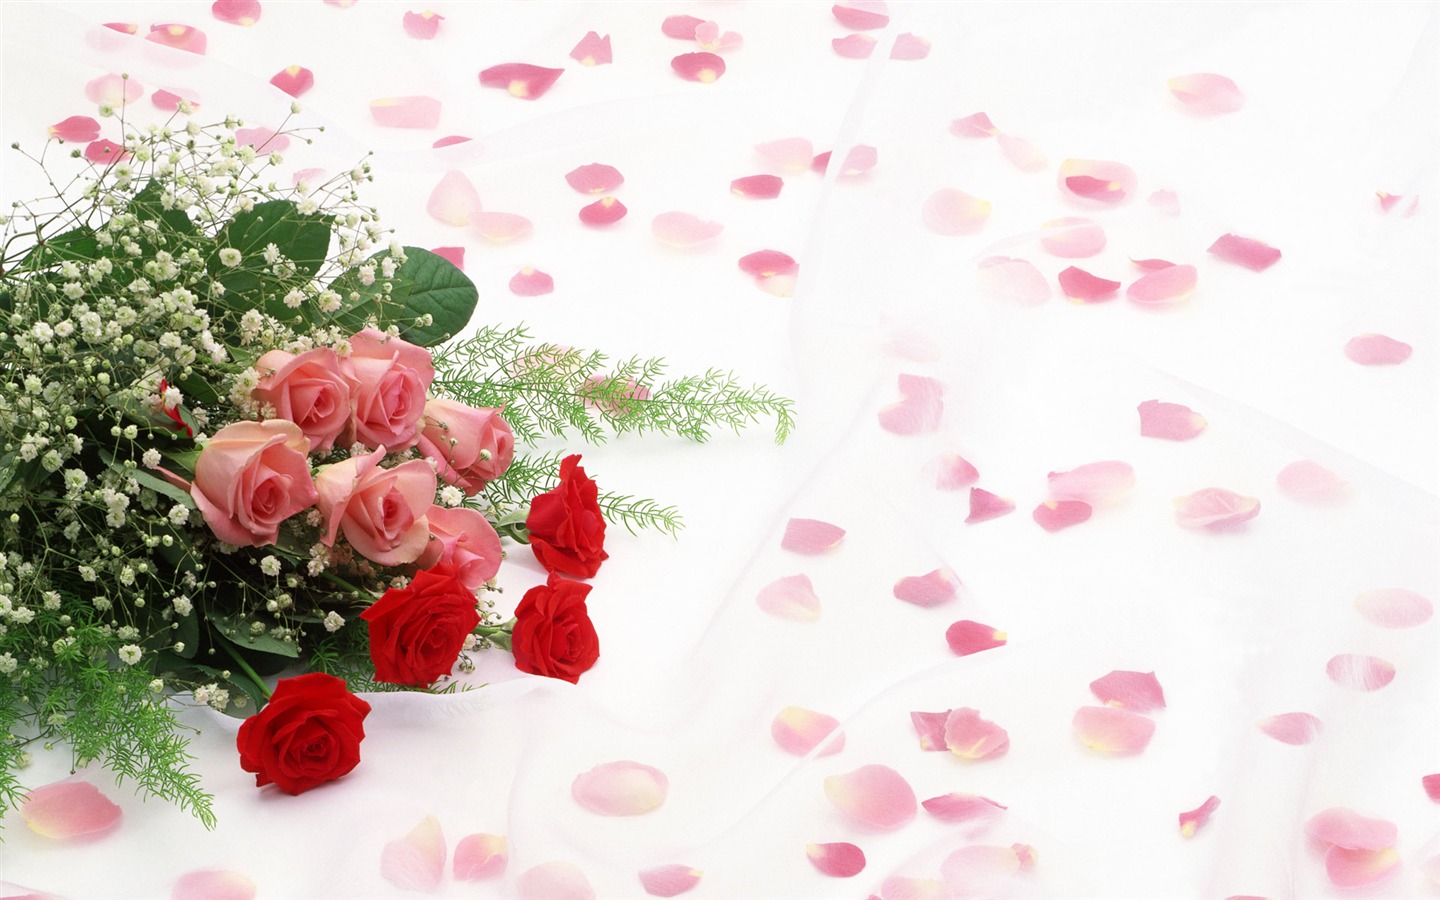 Wedding Flowers items wallpapers (1) #6 - 1440x900